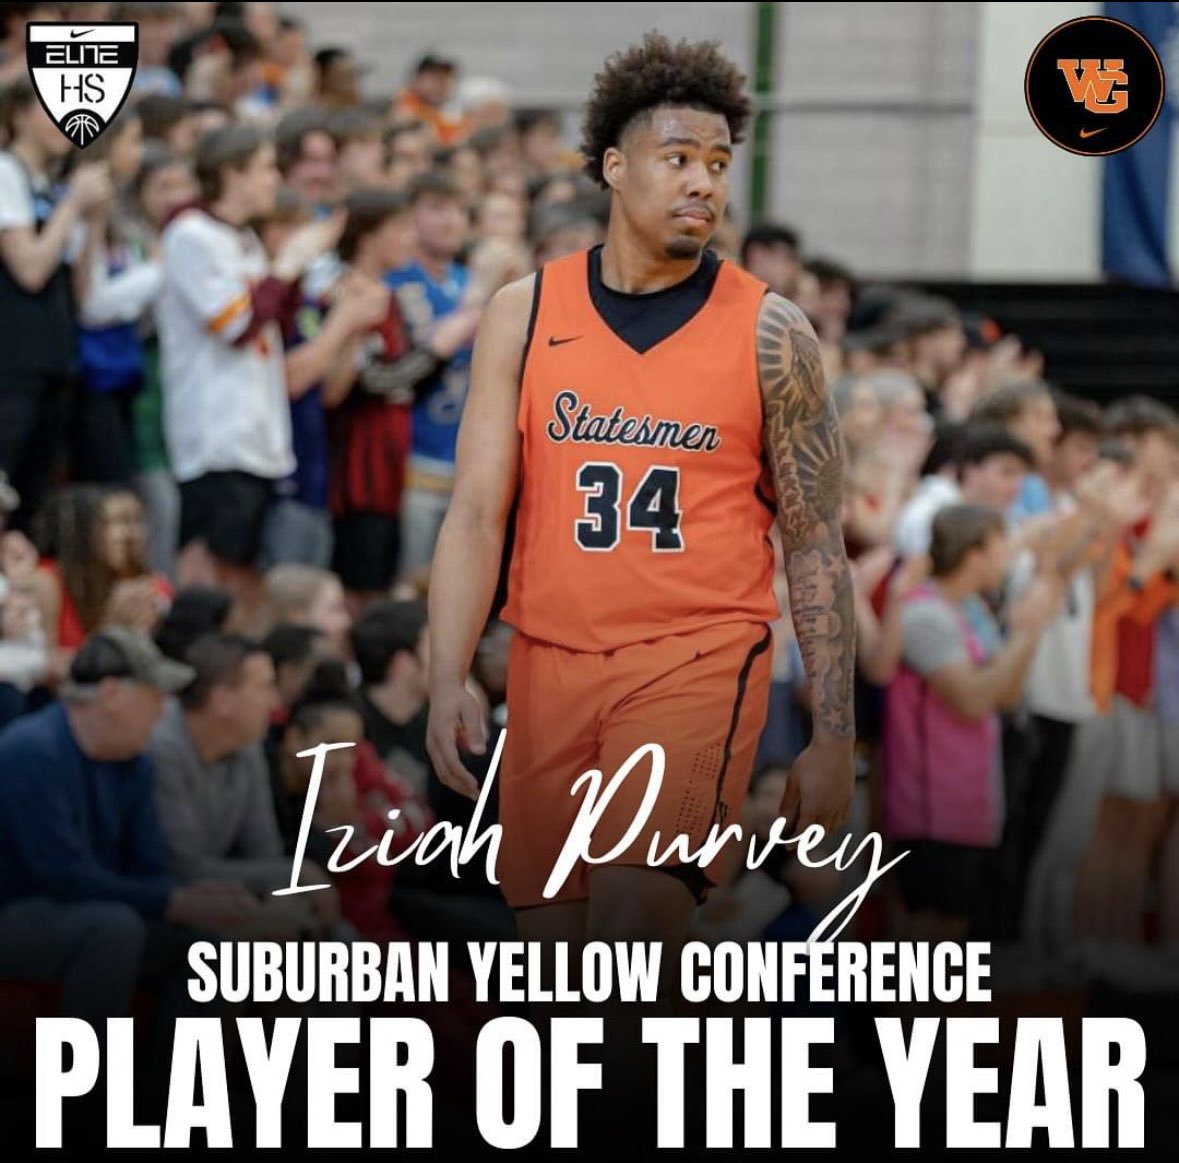 Statesmen well represented on the Suburban All Conference team. Starting with the conference player of the year @IziahPurvey. Iziah is All-Conference for a third consecutive season.